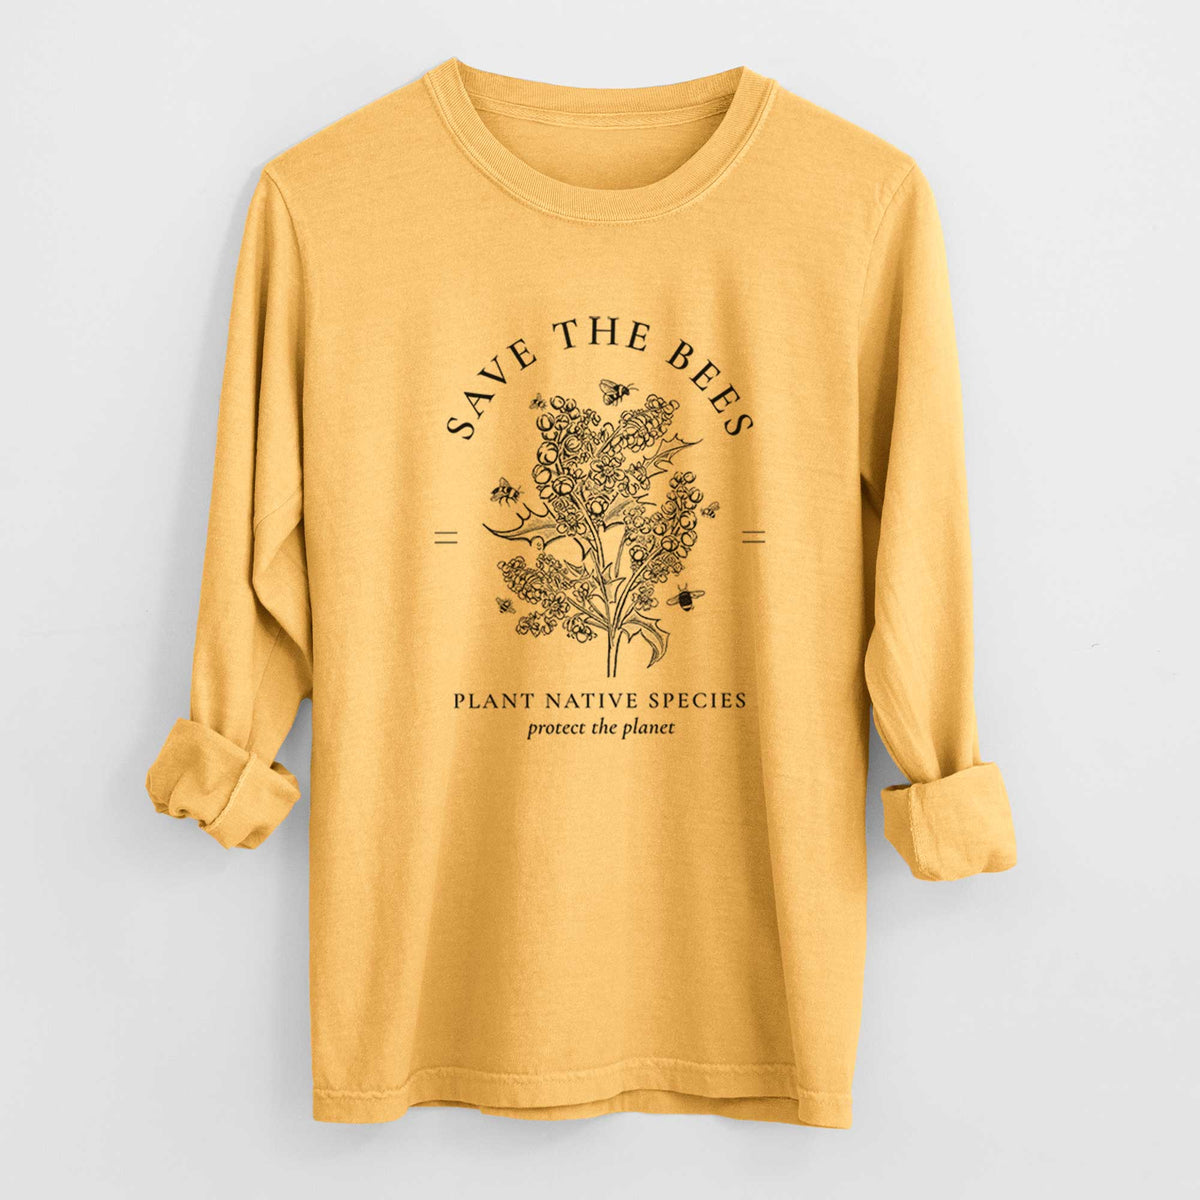 Save the Bees - Plant Native Species - Heavyweight 100% Cotton Long Sleeve